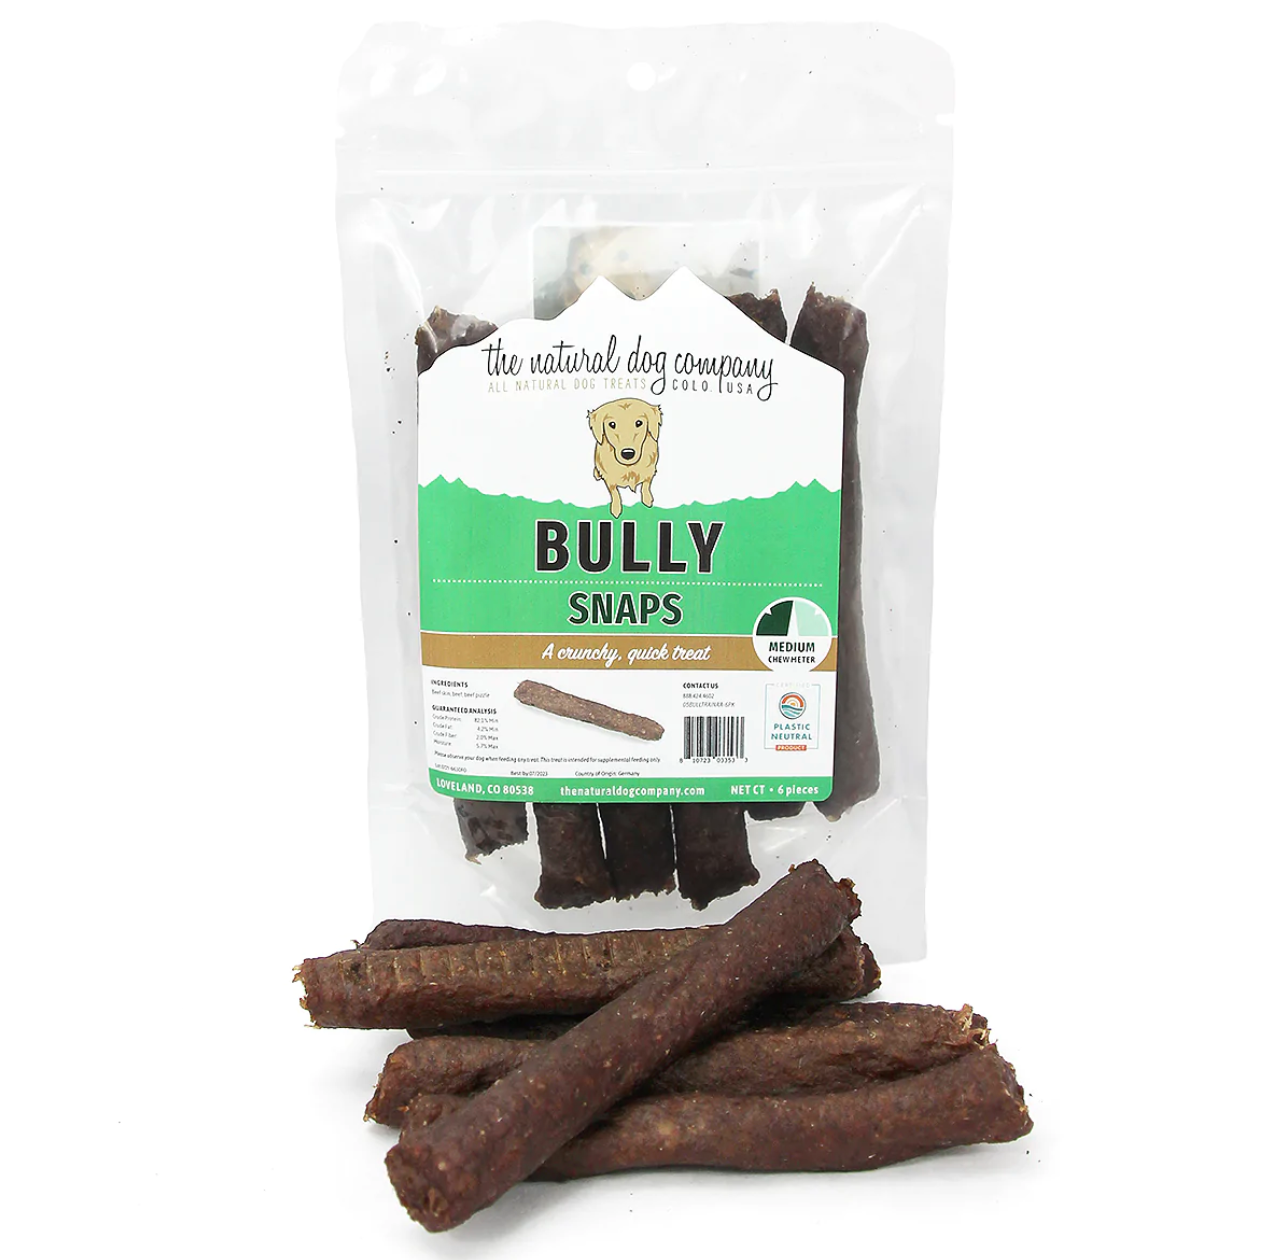 Tuesday's Natural Dog Company "Bully Snaps" Collagen Chew 5" - 6 pack